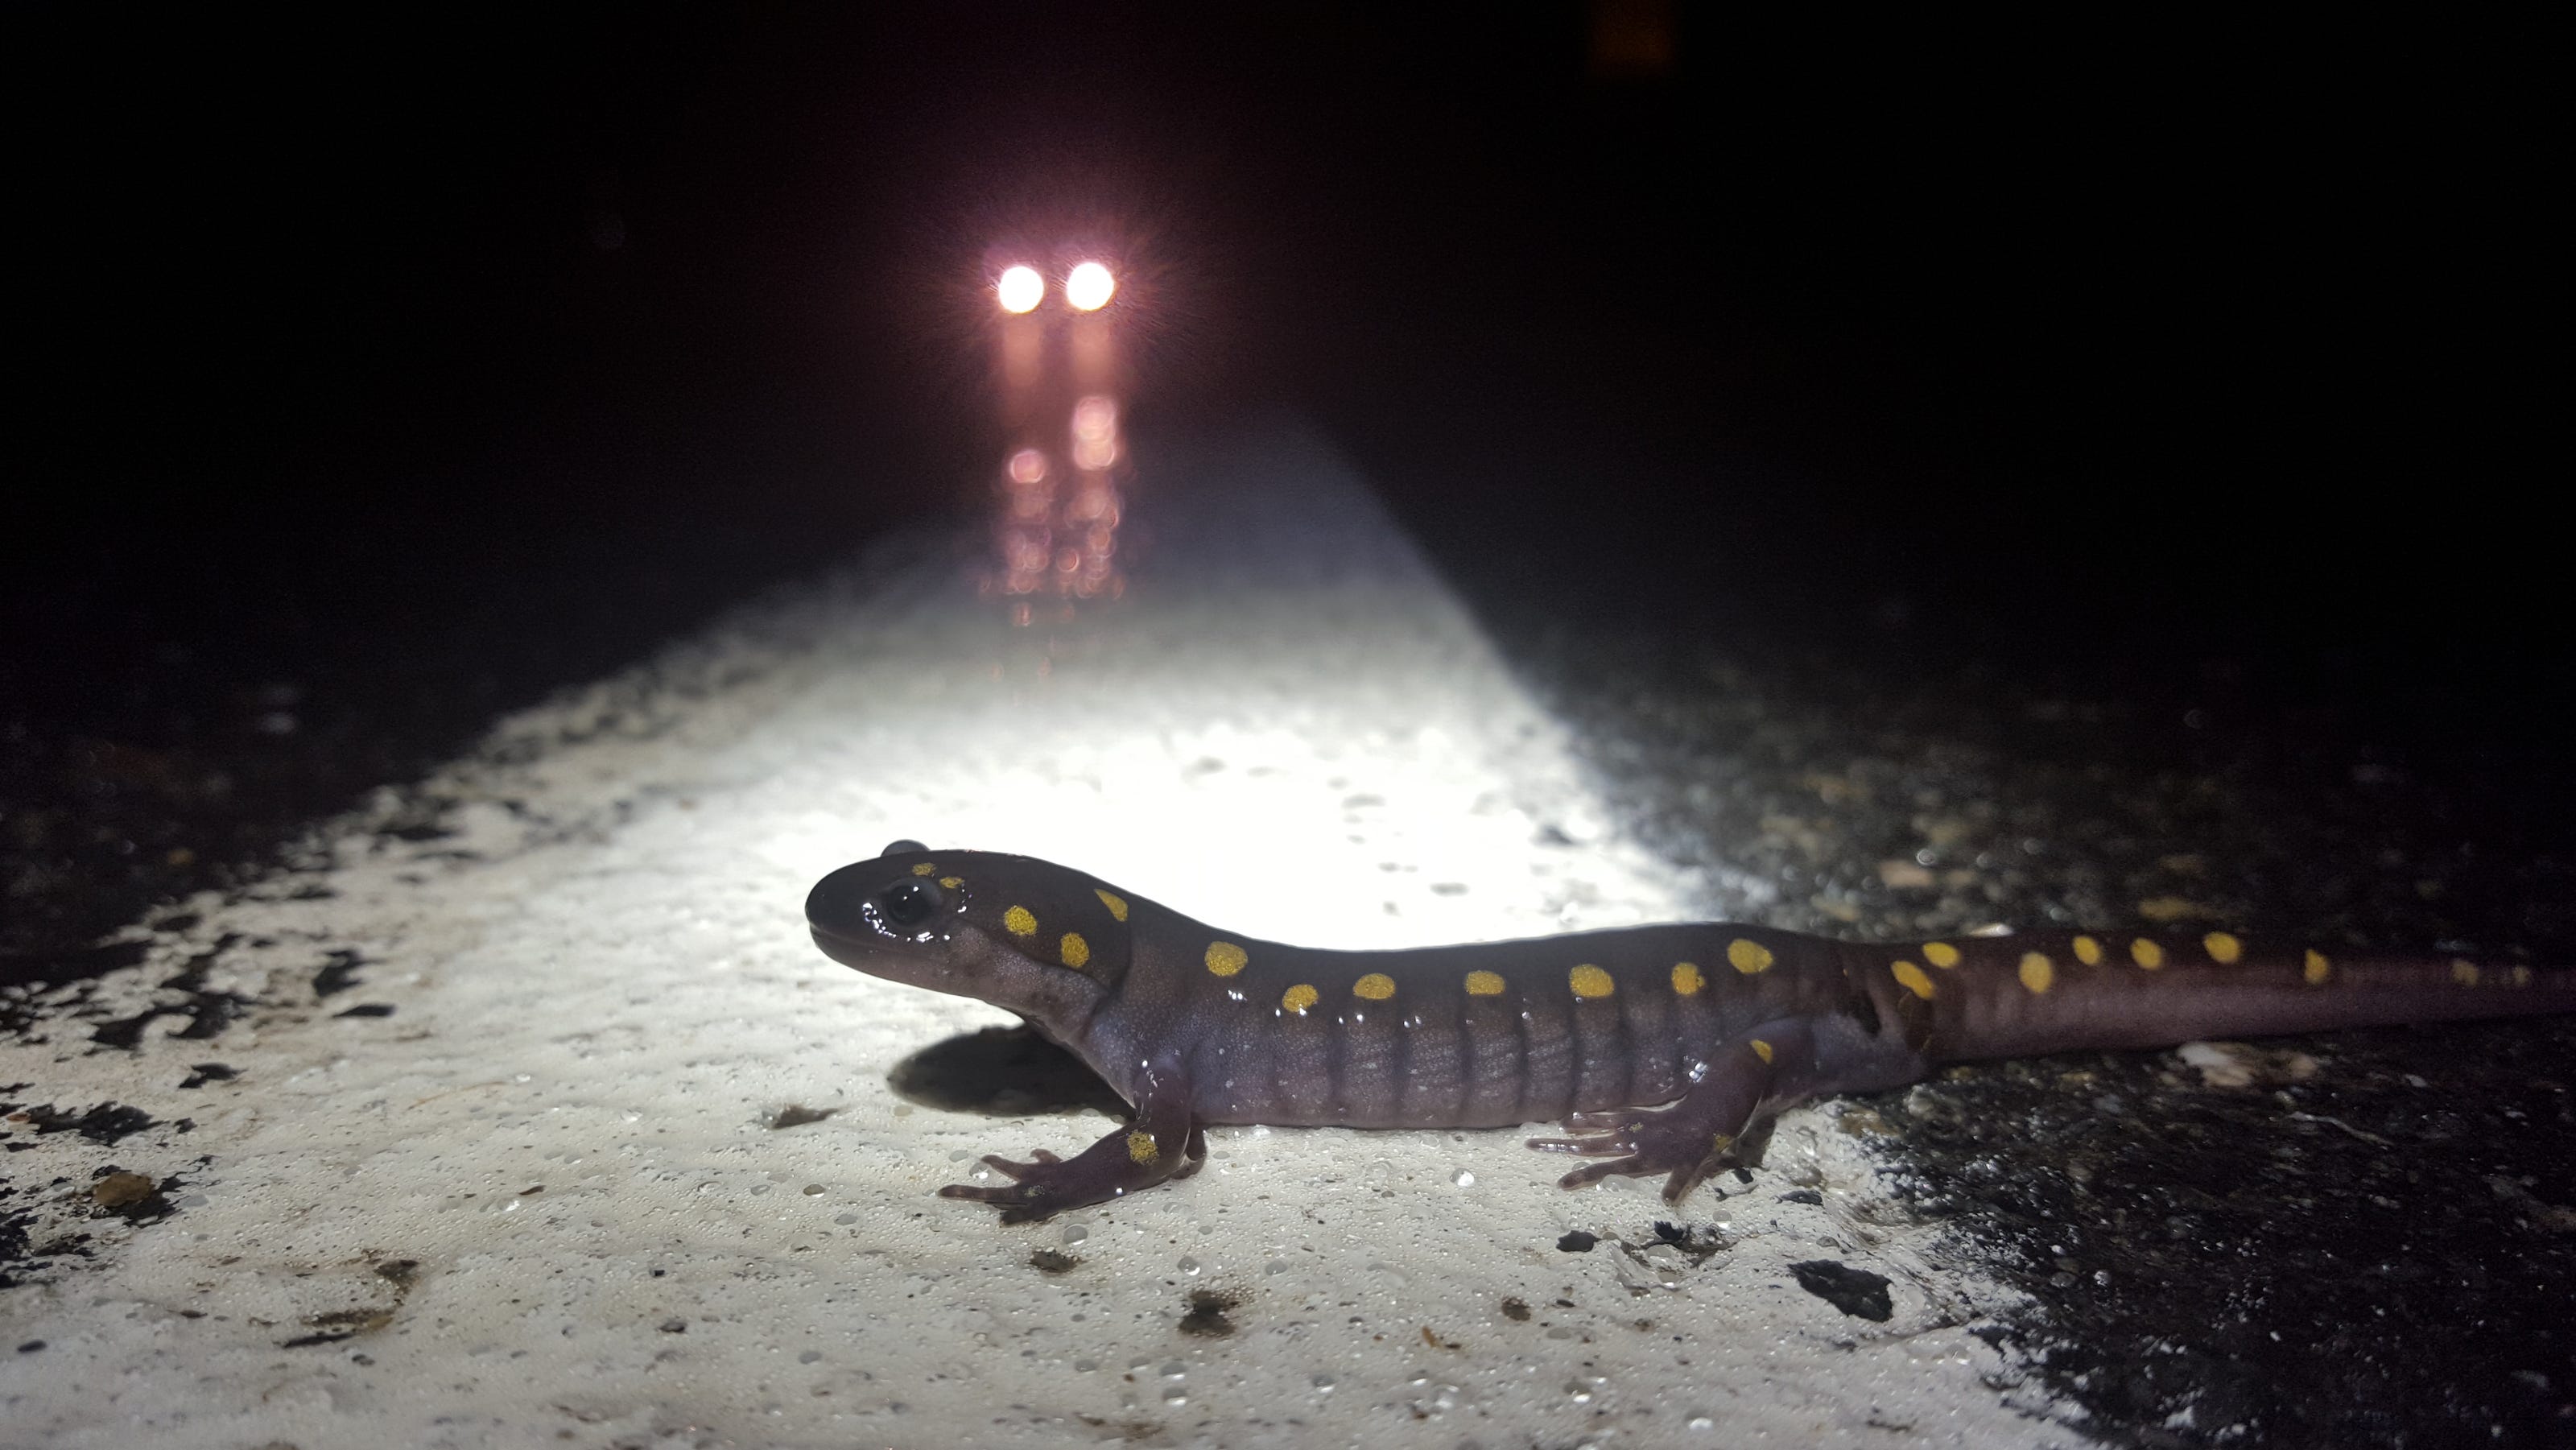  DWG National Park to close River Road so amphibians can cross on warm, wet nights 